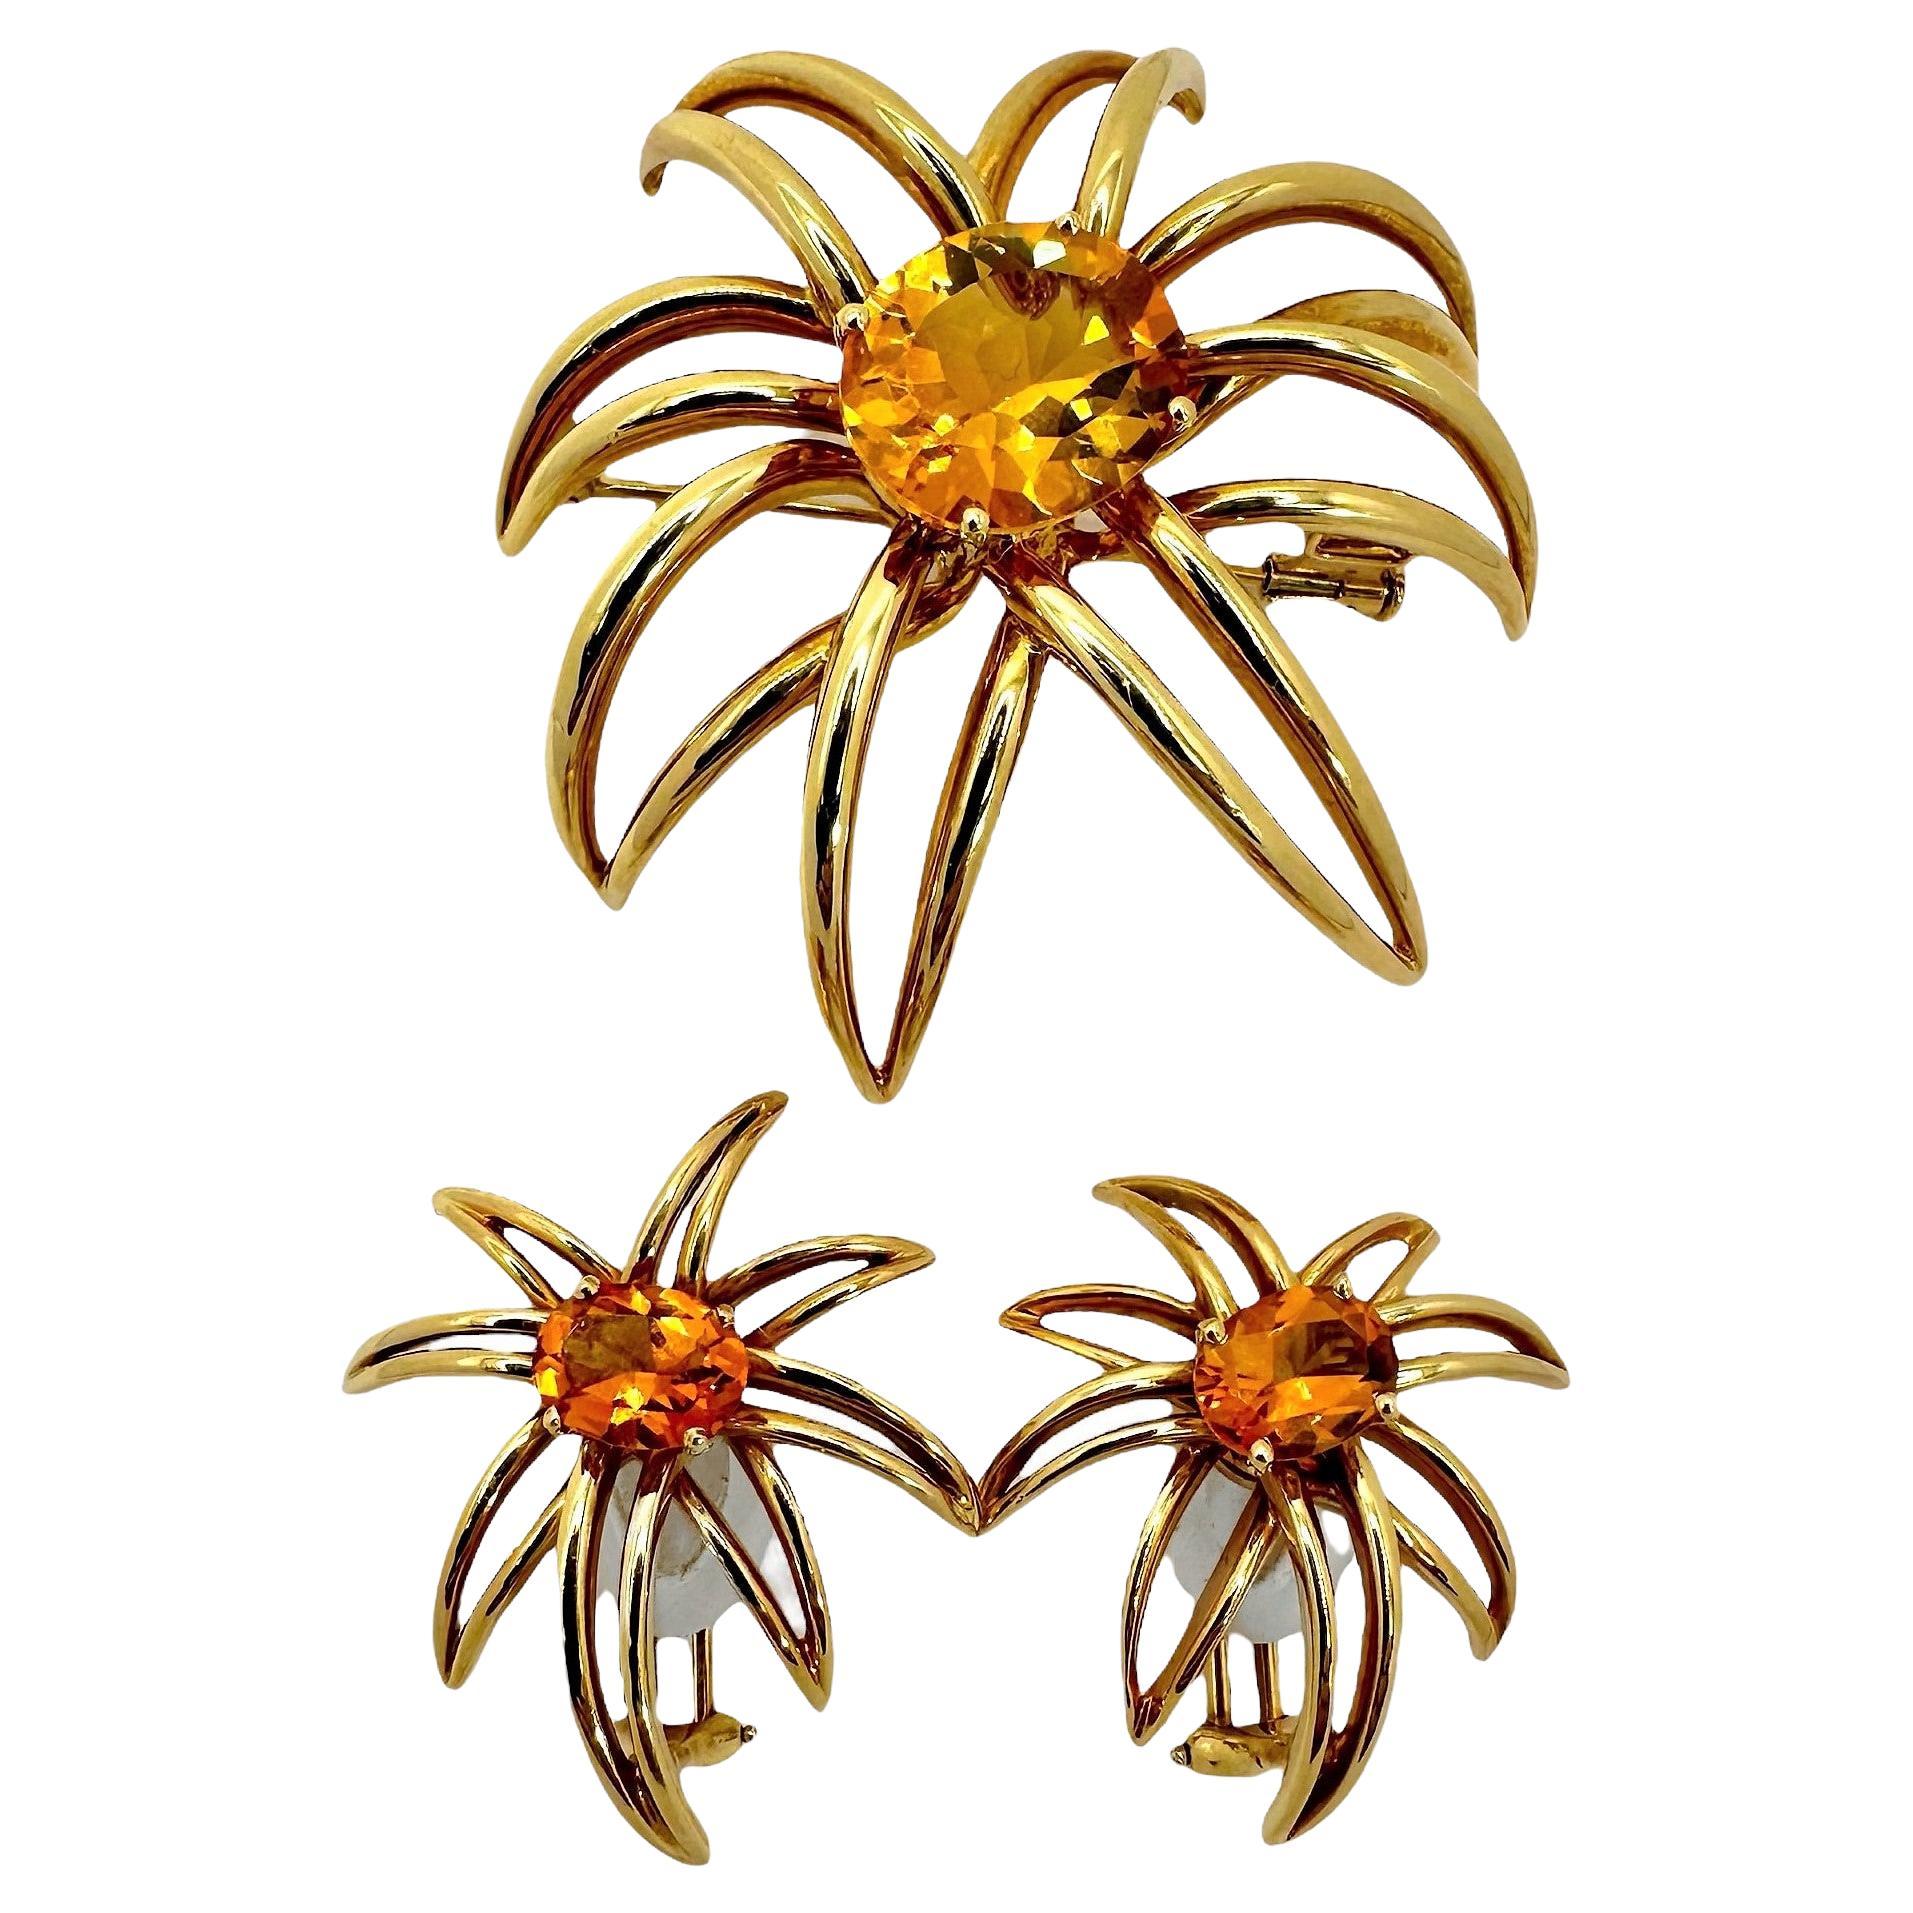 Tiffany & Company 18k Gold and Citrine " Fireworks" Brooch and Earrings Set